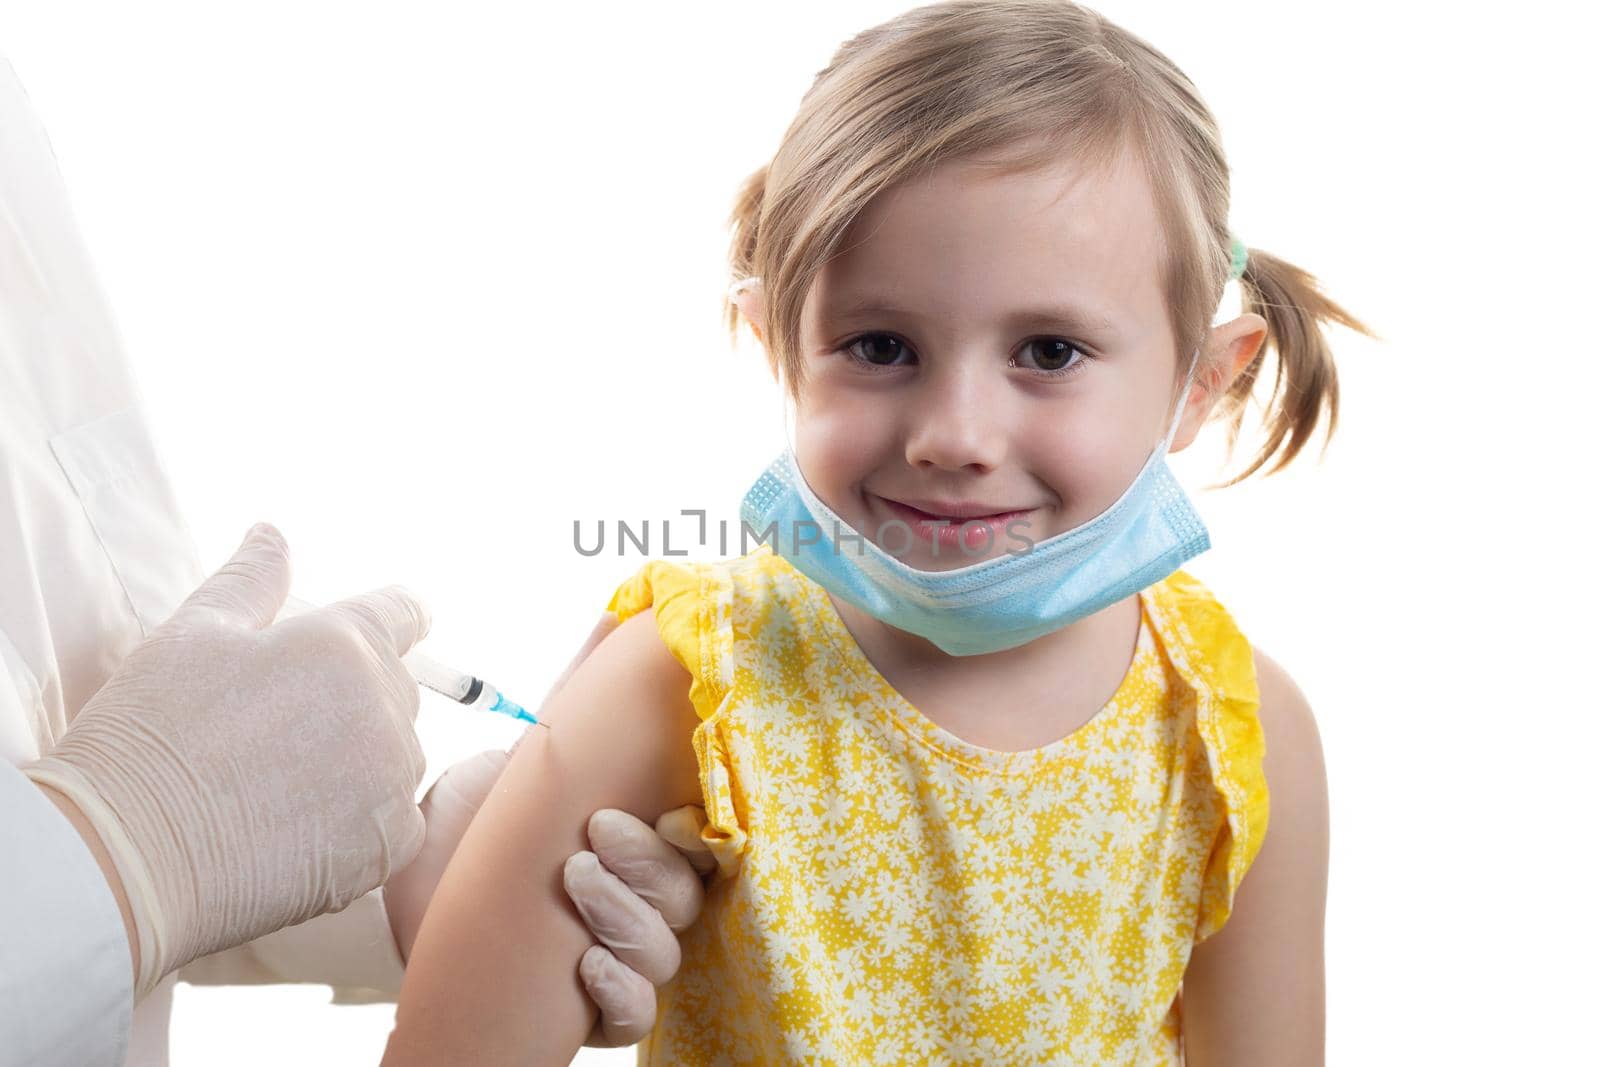 Doctor is vaccinating a young Caucasian girl isolated on white background by galinasharapova